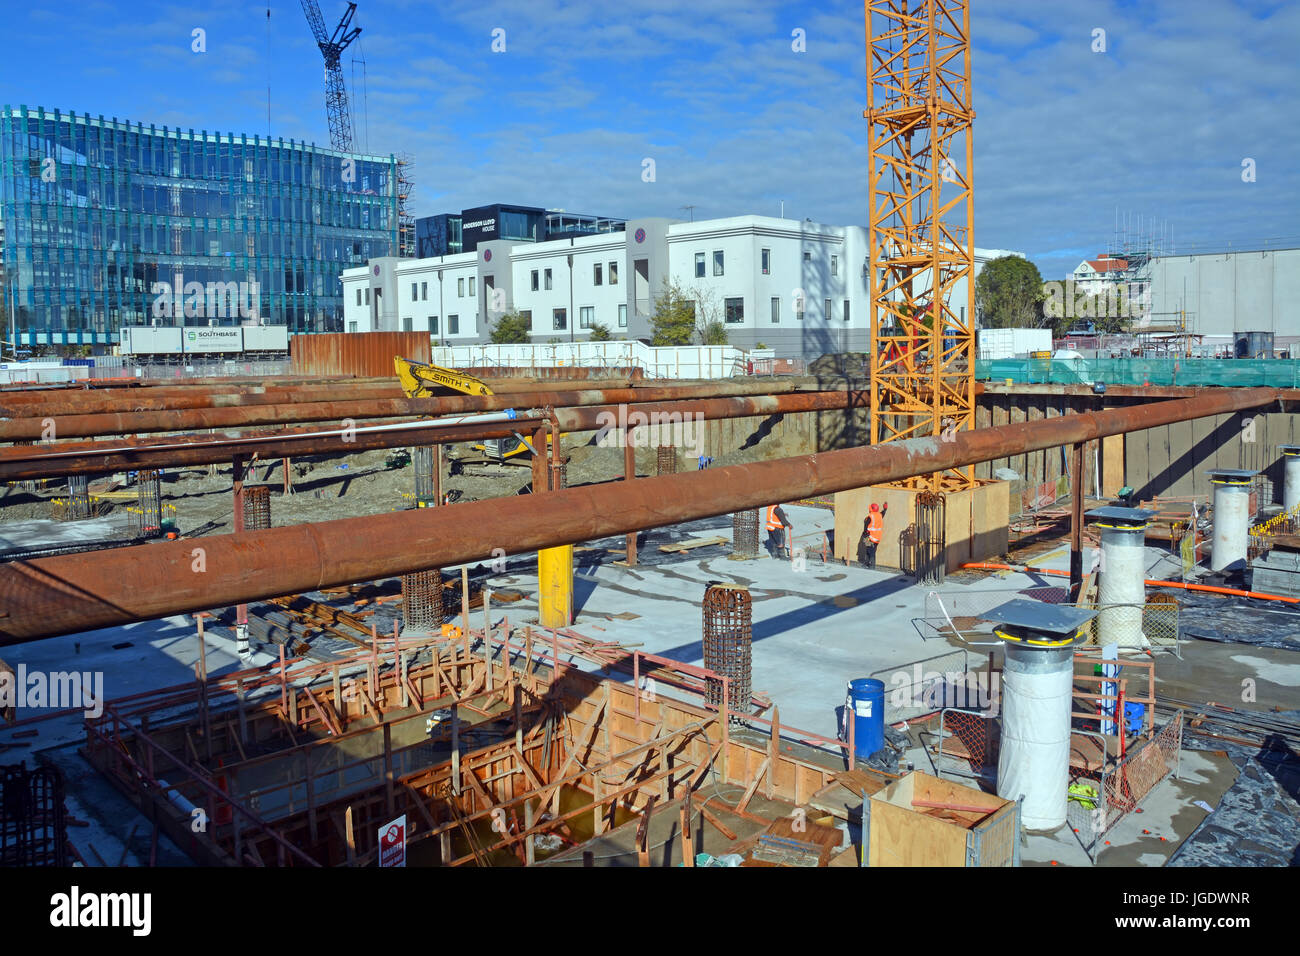 Christchurch, New Zealand - September 13, 2014: Massive earthquake proof building foundations being constructed on the corner of Cambridge Terrace and Stock Photo